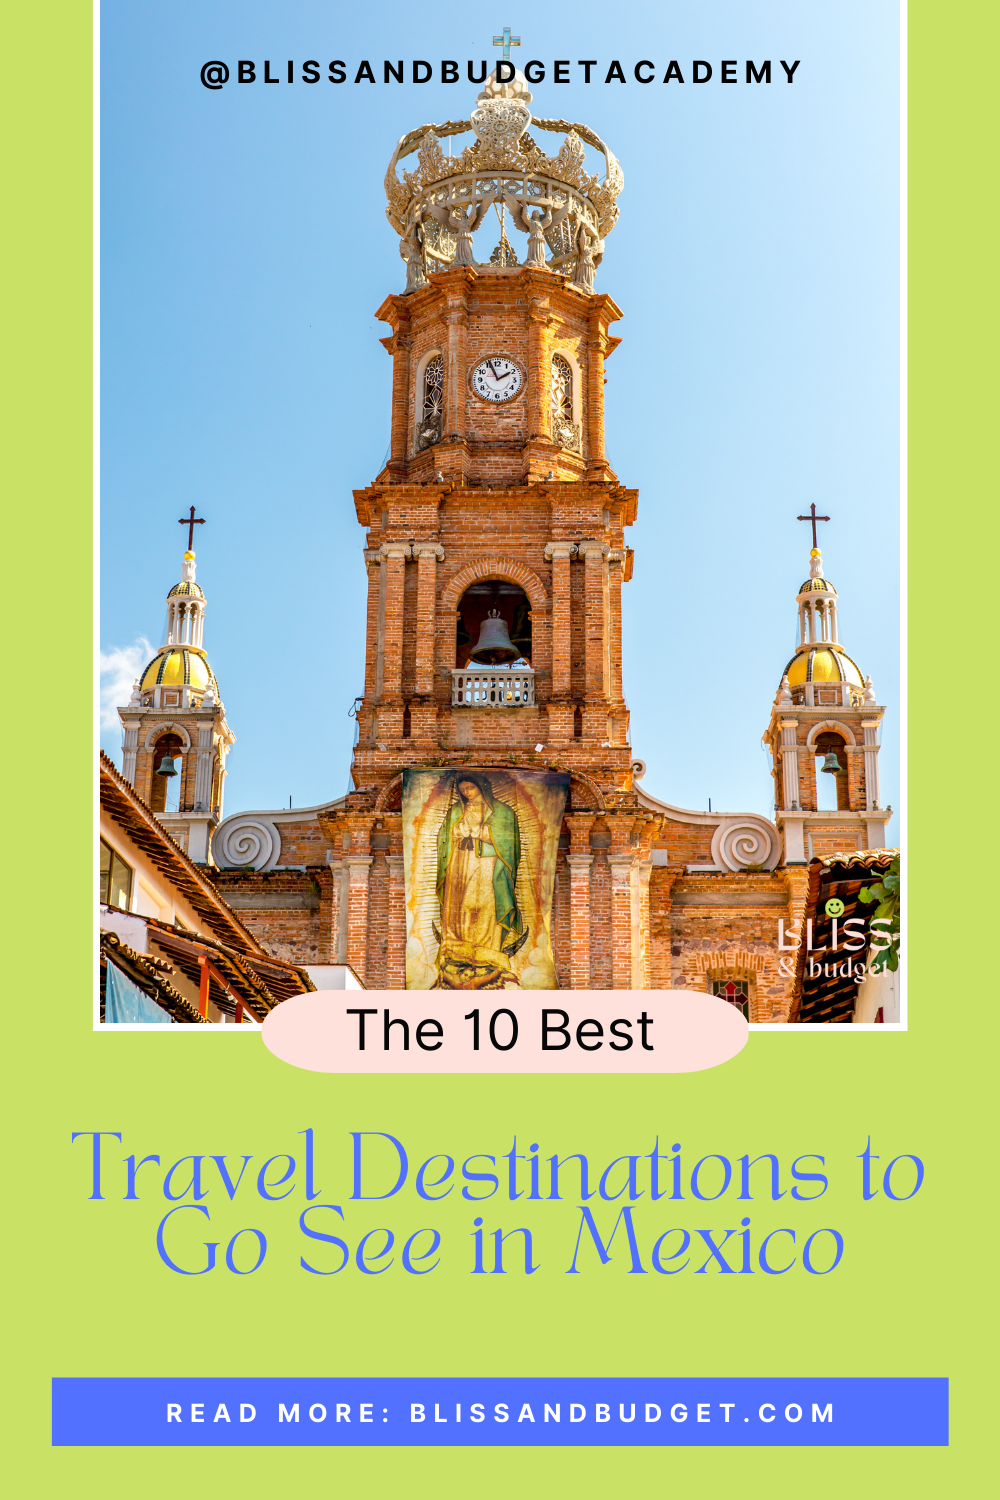 The 10 Best Travel Destinations to Go See in Mexico